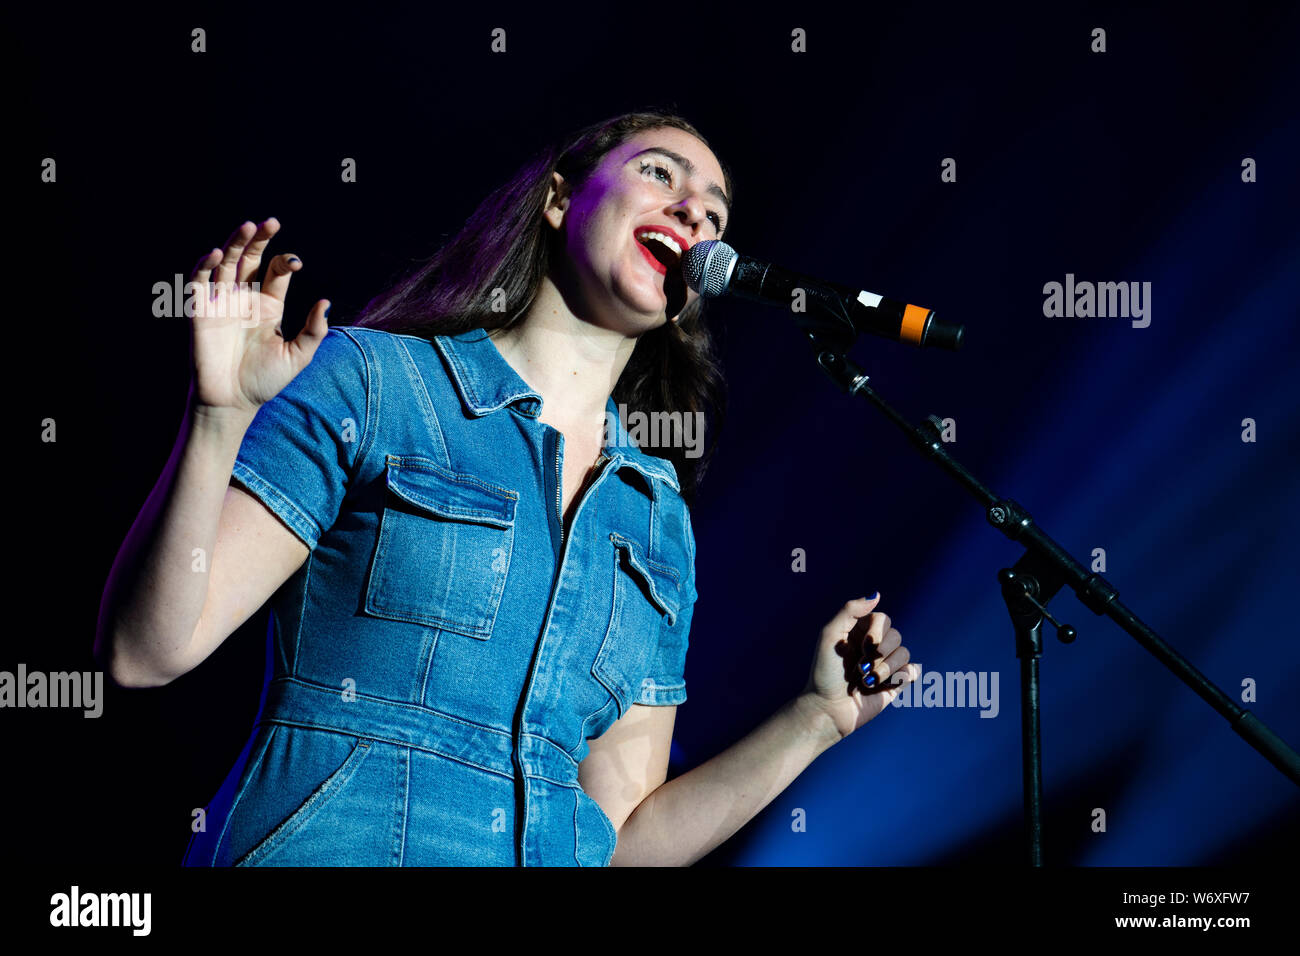 Edinburgh, Scotland, UK. 3 August 2019. The Pleasance Opening Gala launch at the Edinburgh Fringe Festival. The Pleasance venues are back for their 35th season with more than 270 shows. Pictured; Catherine Cohen. Iain Masterton/Alamy Live News Stock Photo